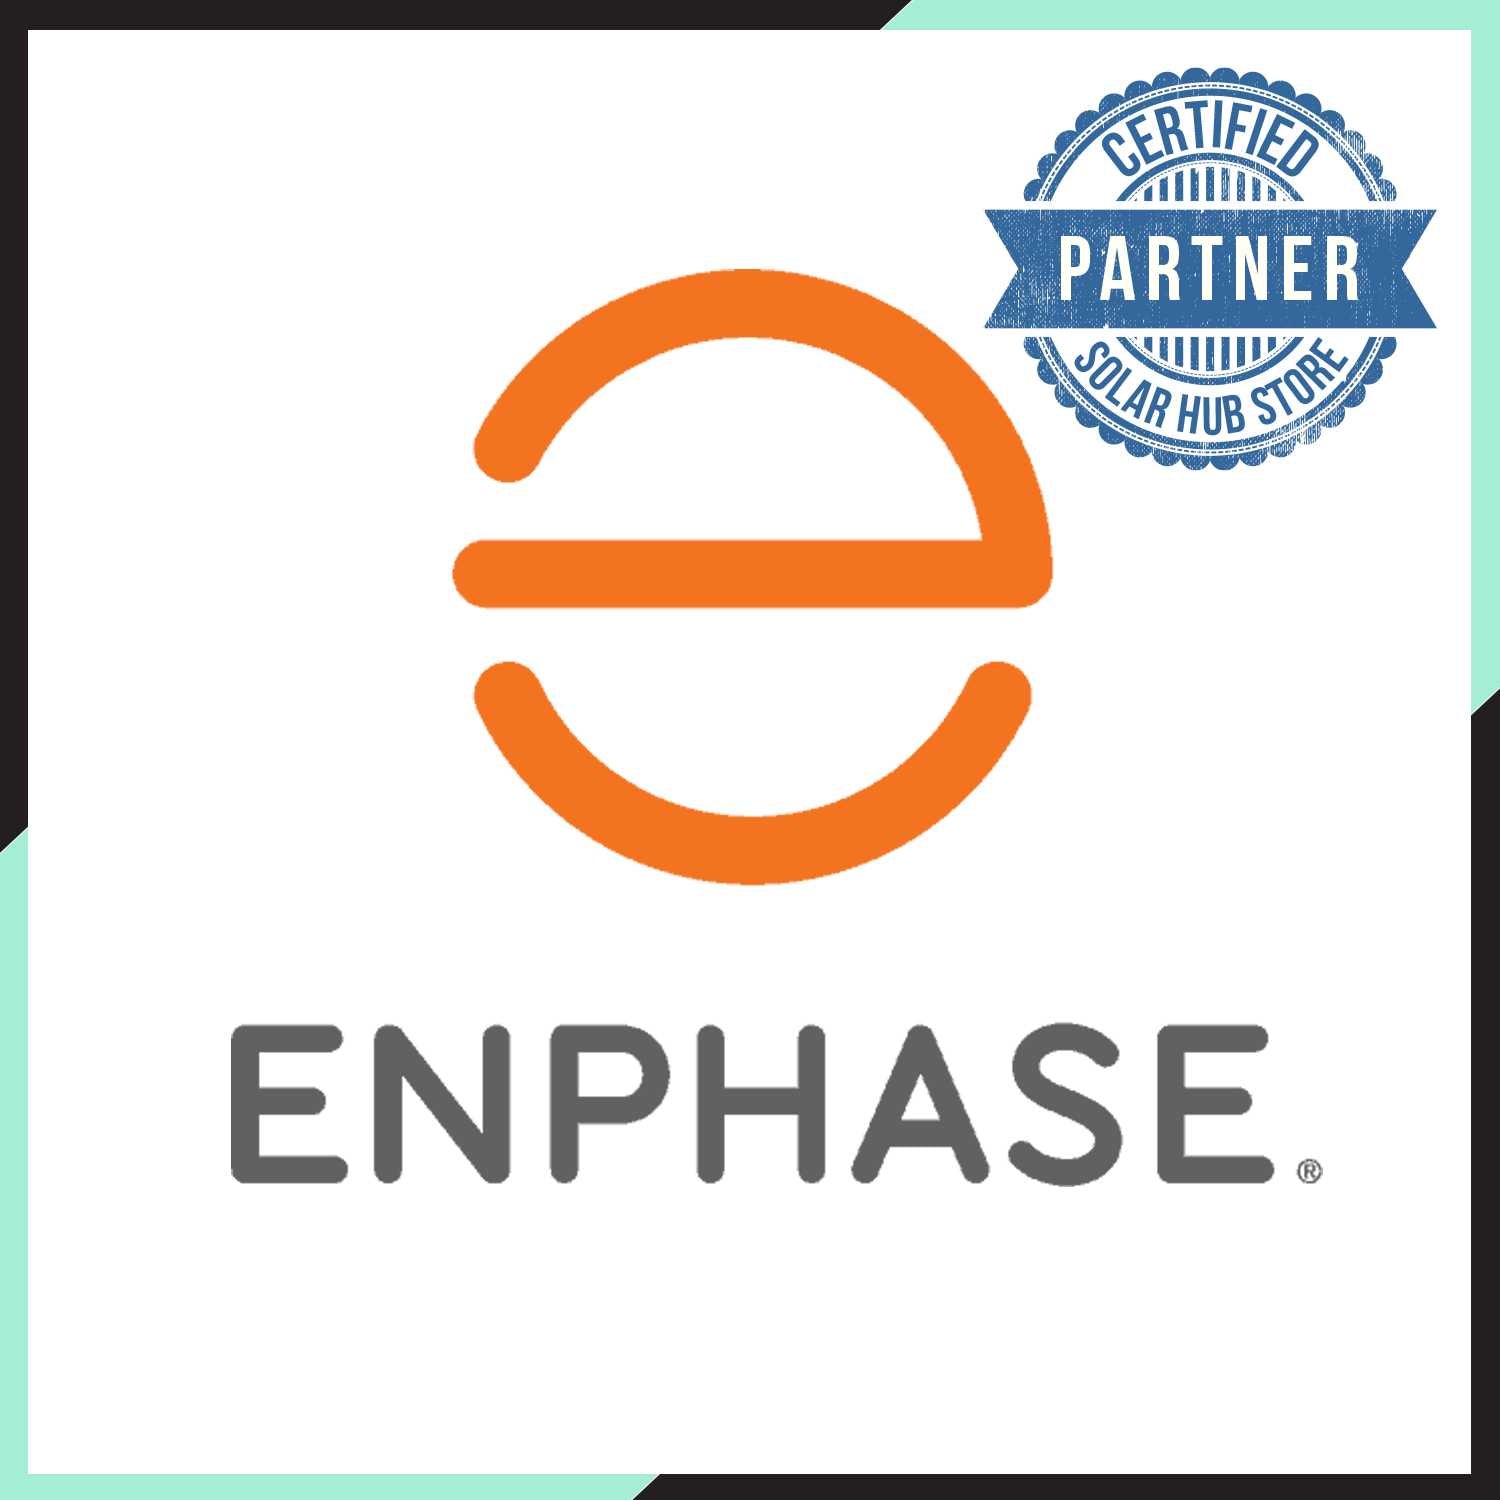 Enphase IQ Battery 10 - Revolutionary Energy Storage System for Your Home